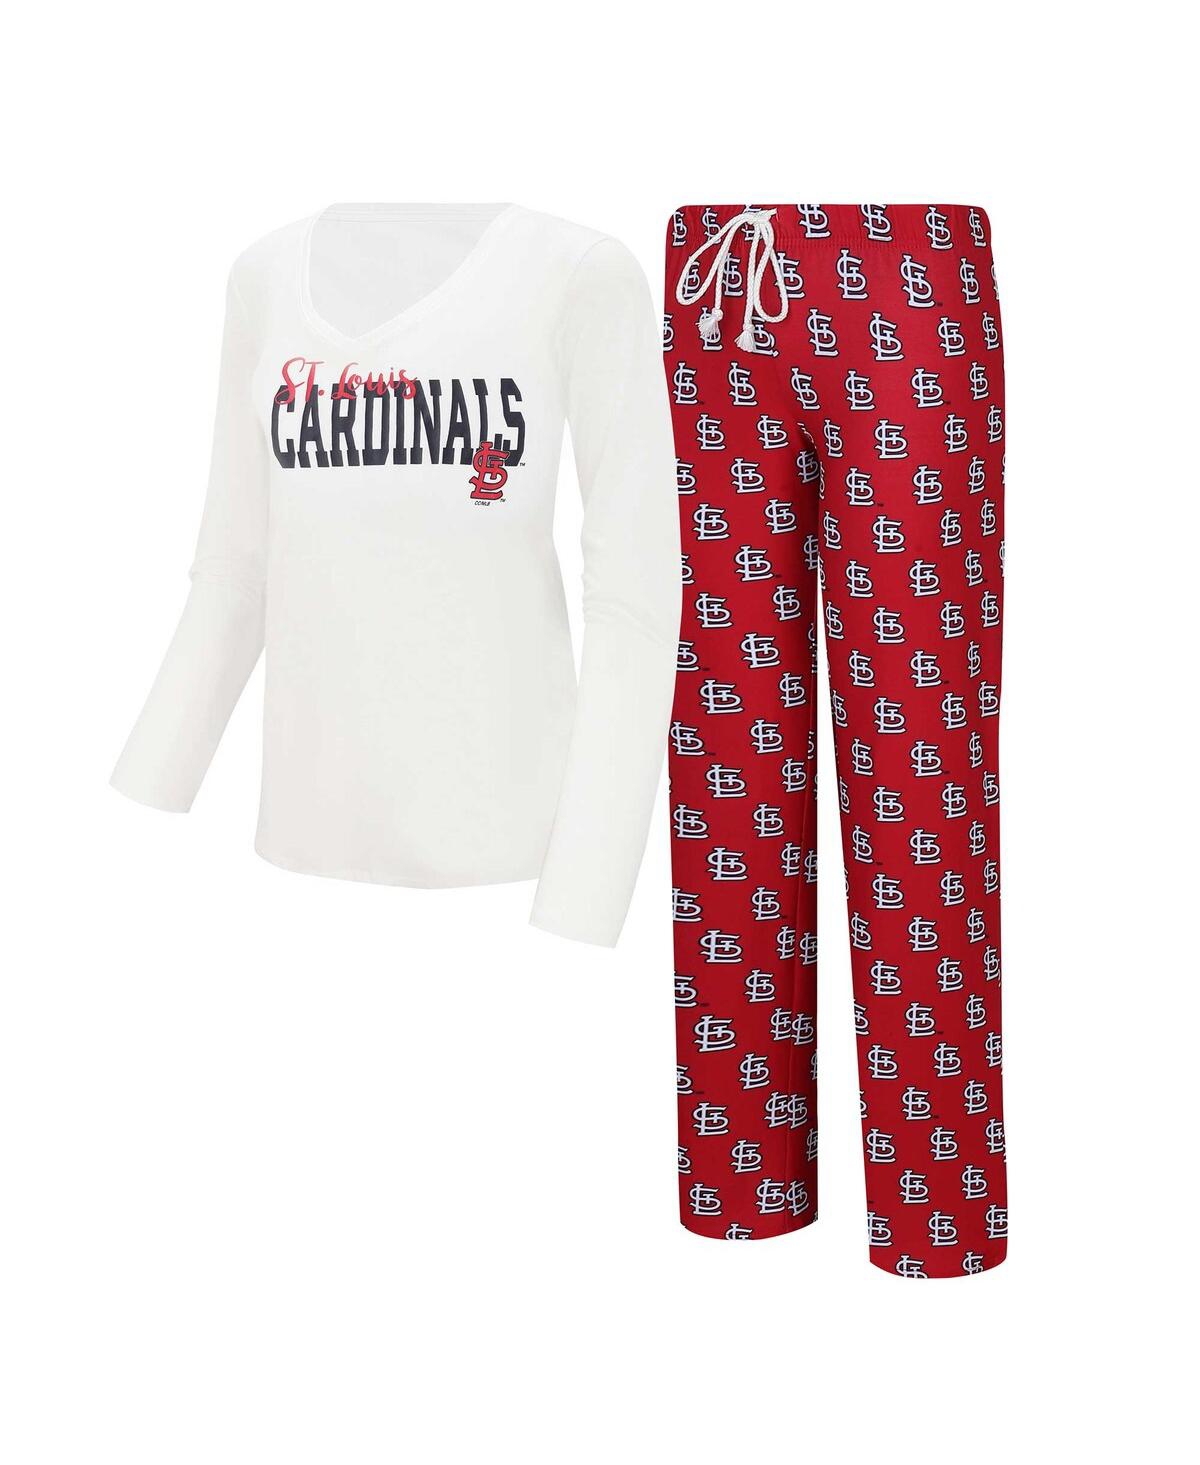 Women's Concepts Sport White, Red St. Louis Cardinals Long Sleeve V-Neck T-shirt and Gauge Pants Sleep Set - White, Red